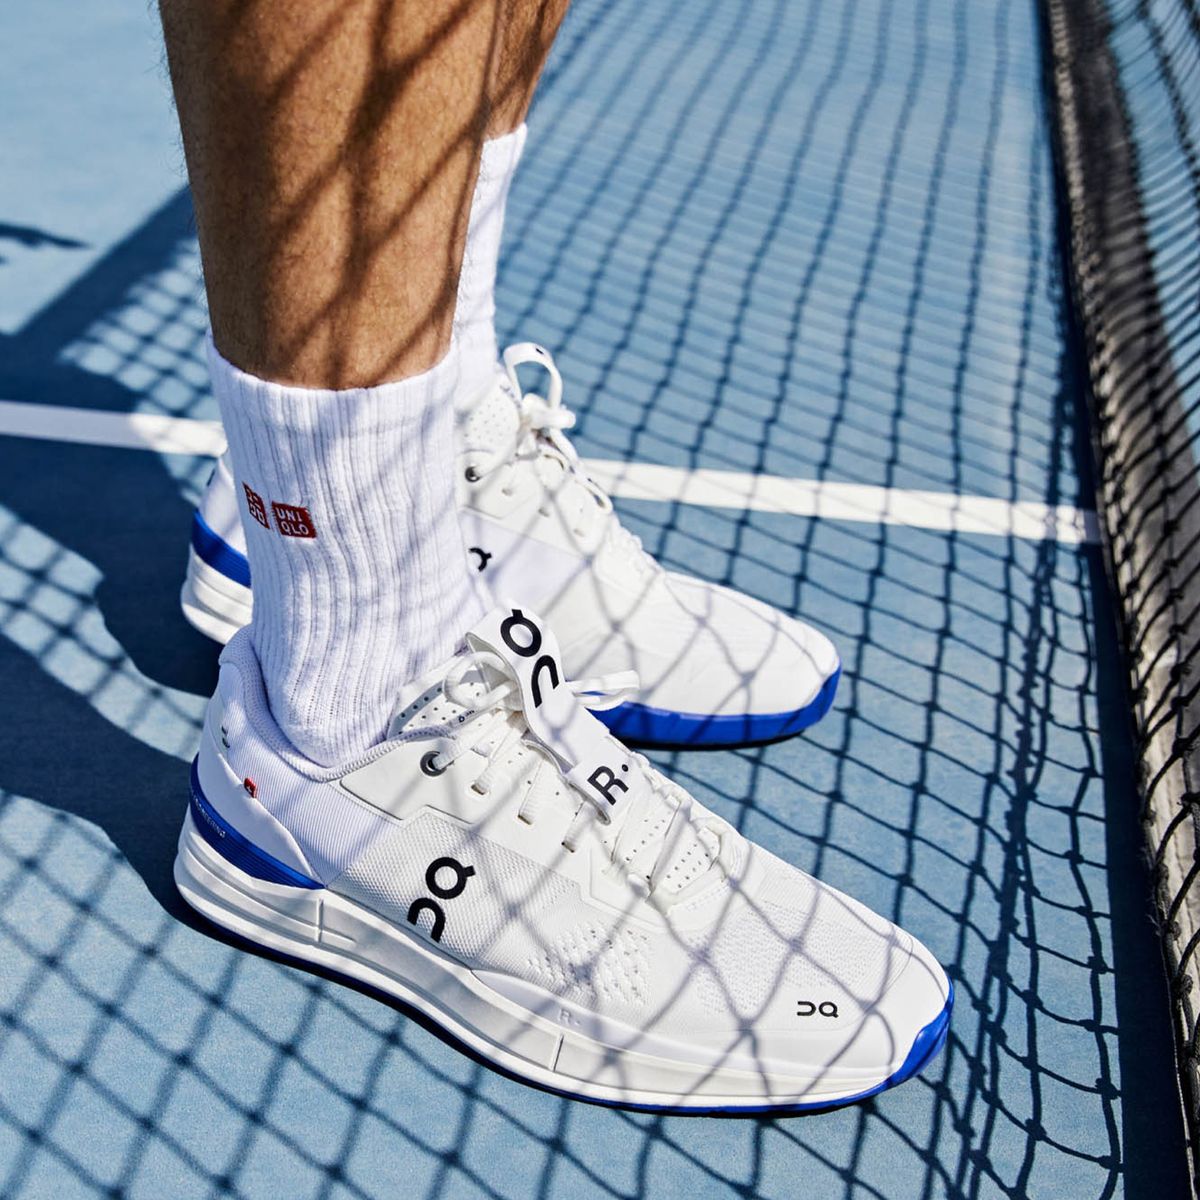 Roger Federer's Exclusive Tennis Shoe Finally Back in Stock